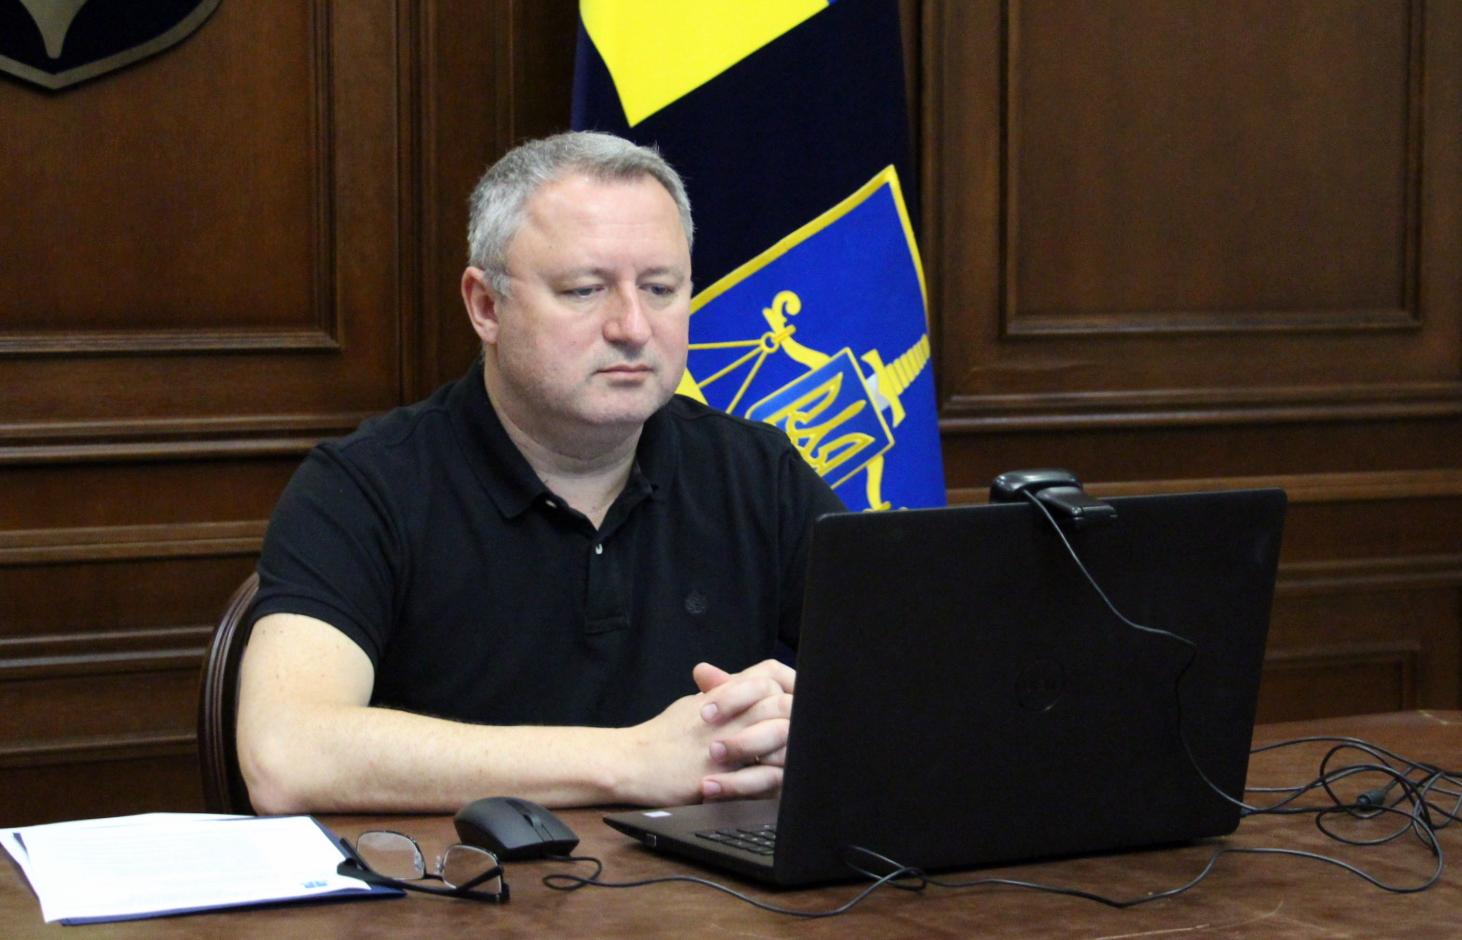 Andriy Kostin: Thanks to the use of advanced technologies, the investigation of Russian war crimes is progressing